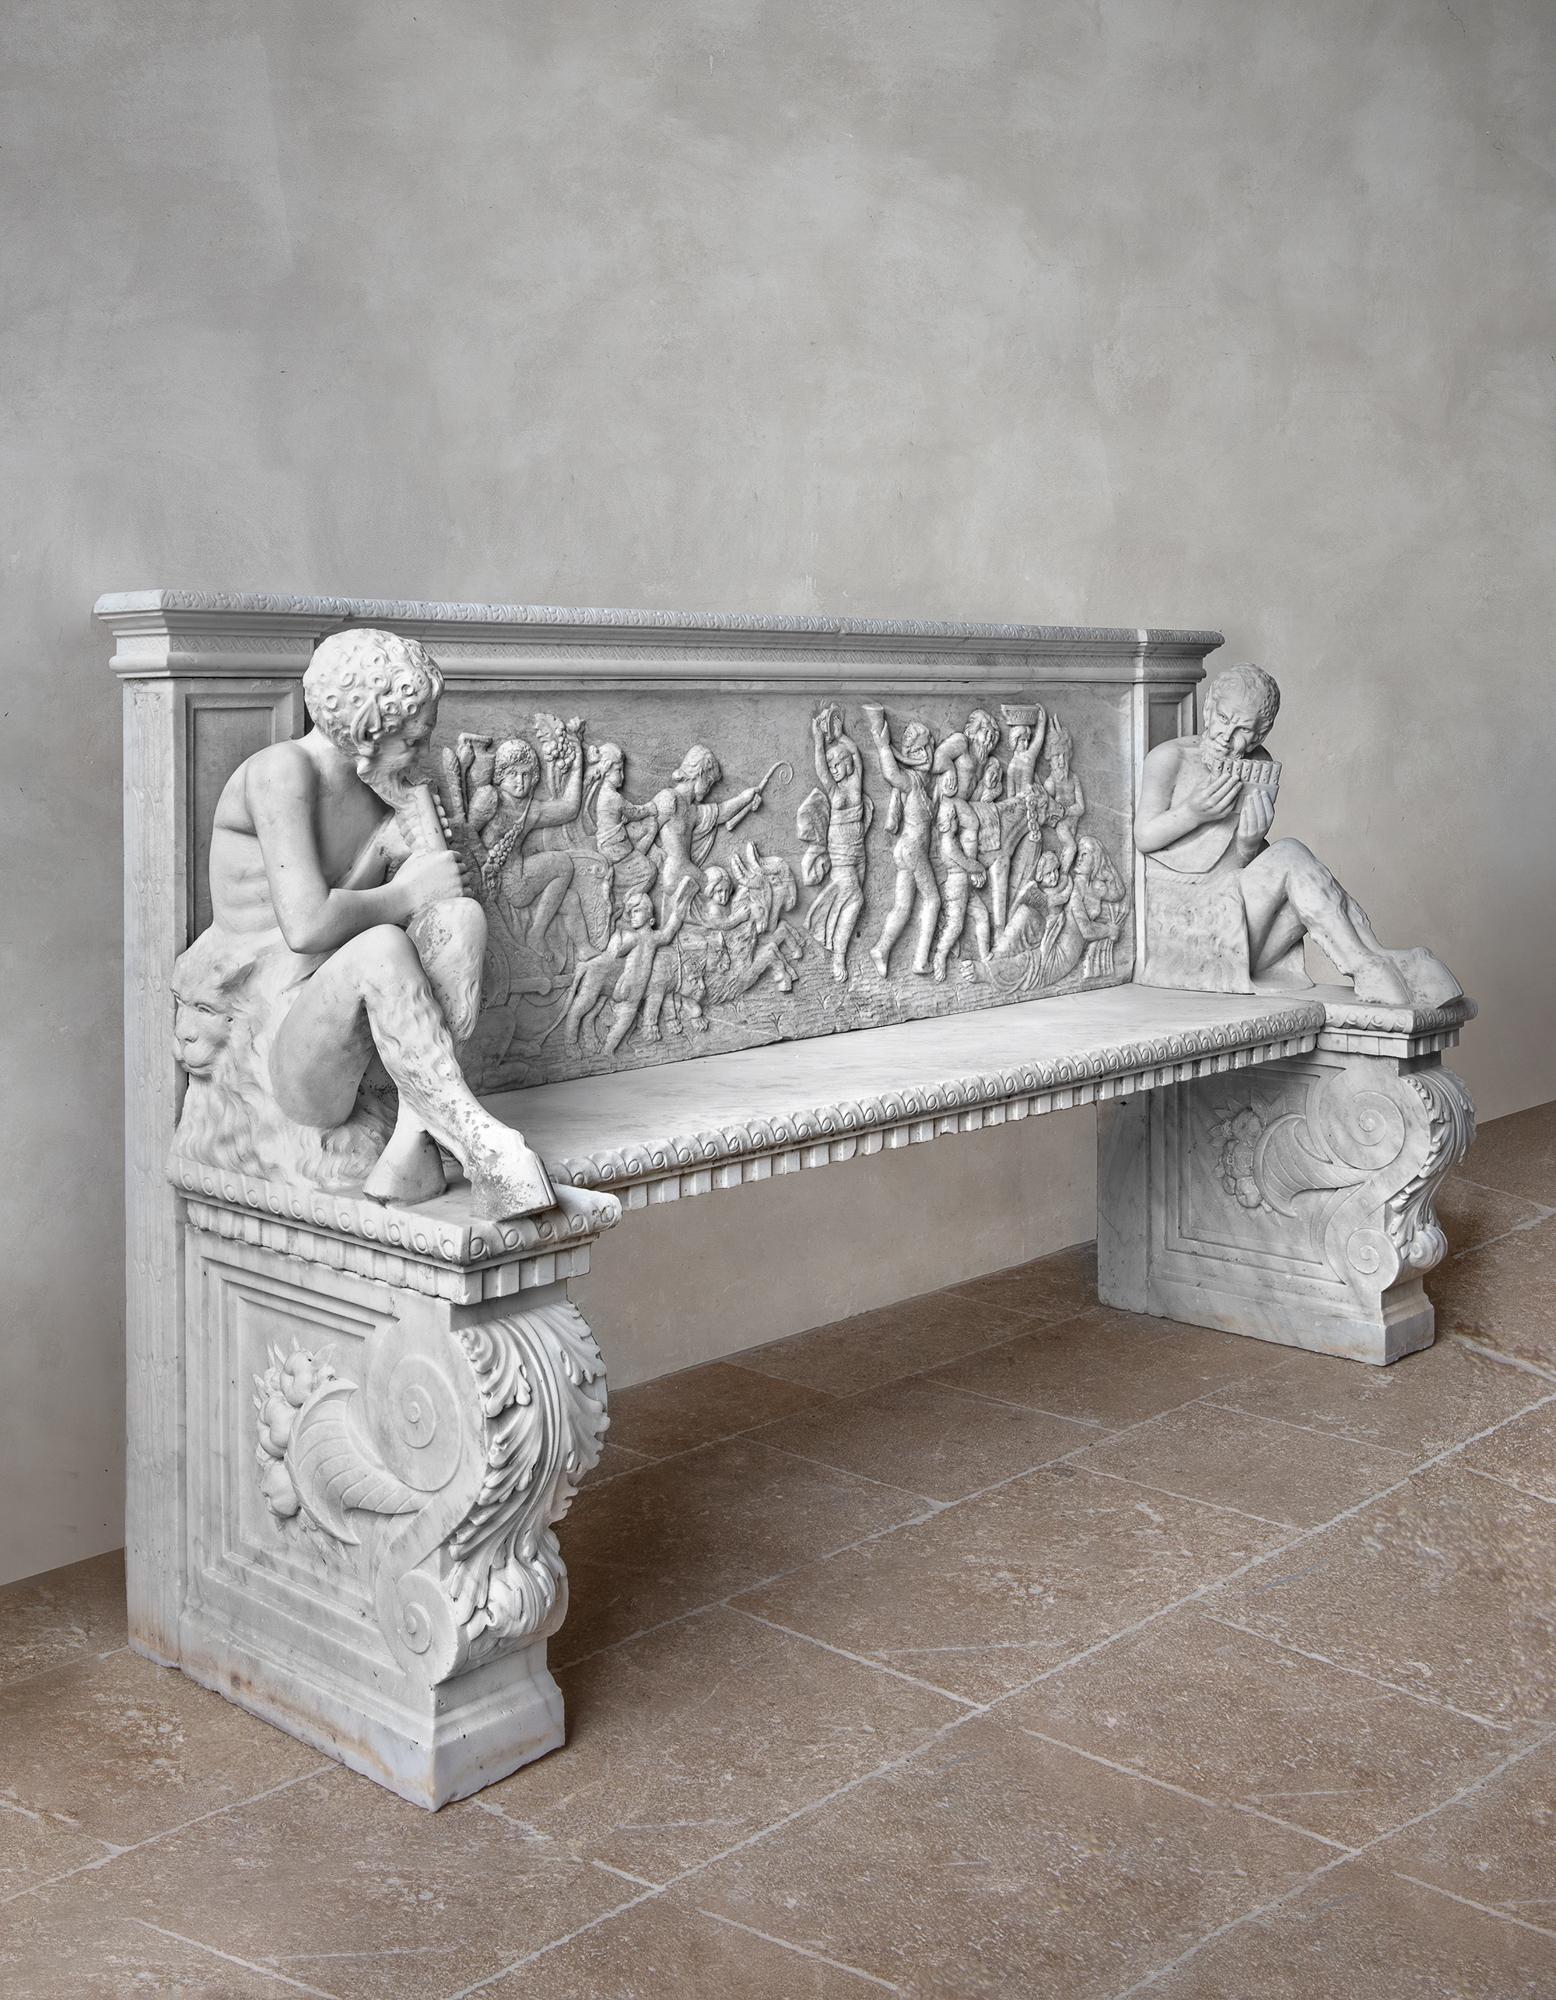 A rare and impressive carved white marble neoclassical bench. Late 19th century Italian, Florentine.

Backrest with relief carving of Bacchus in triumphal procession, armrests of reclining satyrs with musical pipes, on acanthus leaf carved